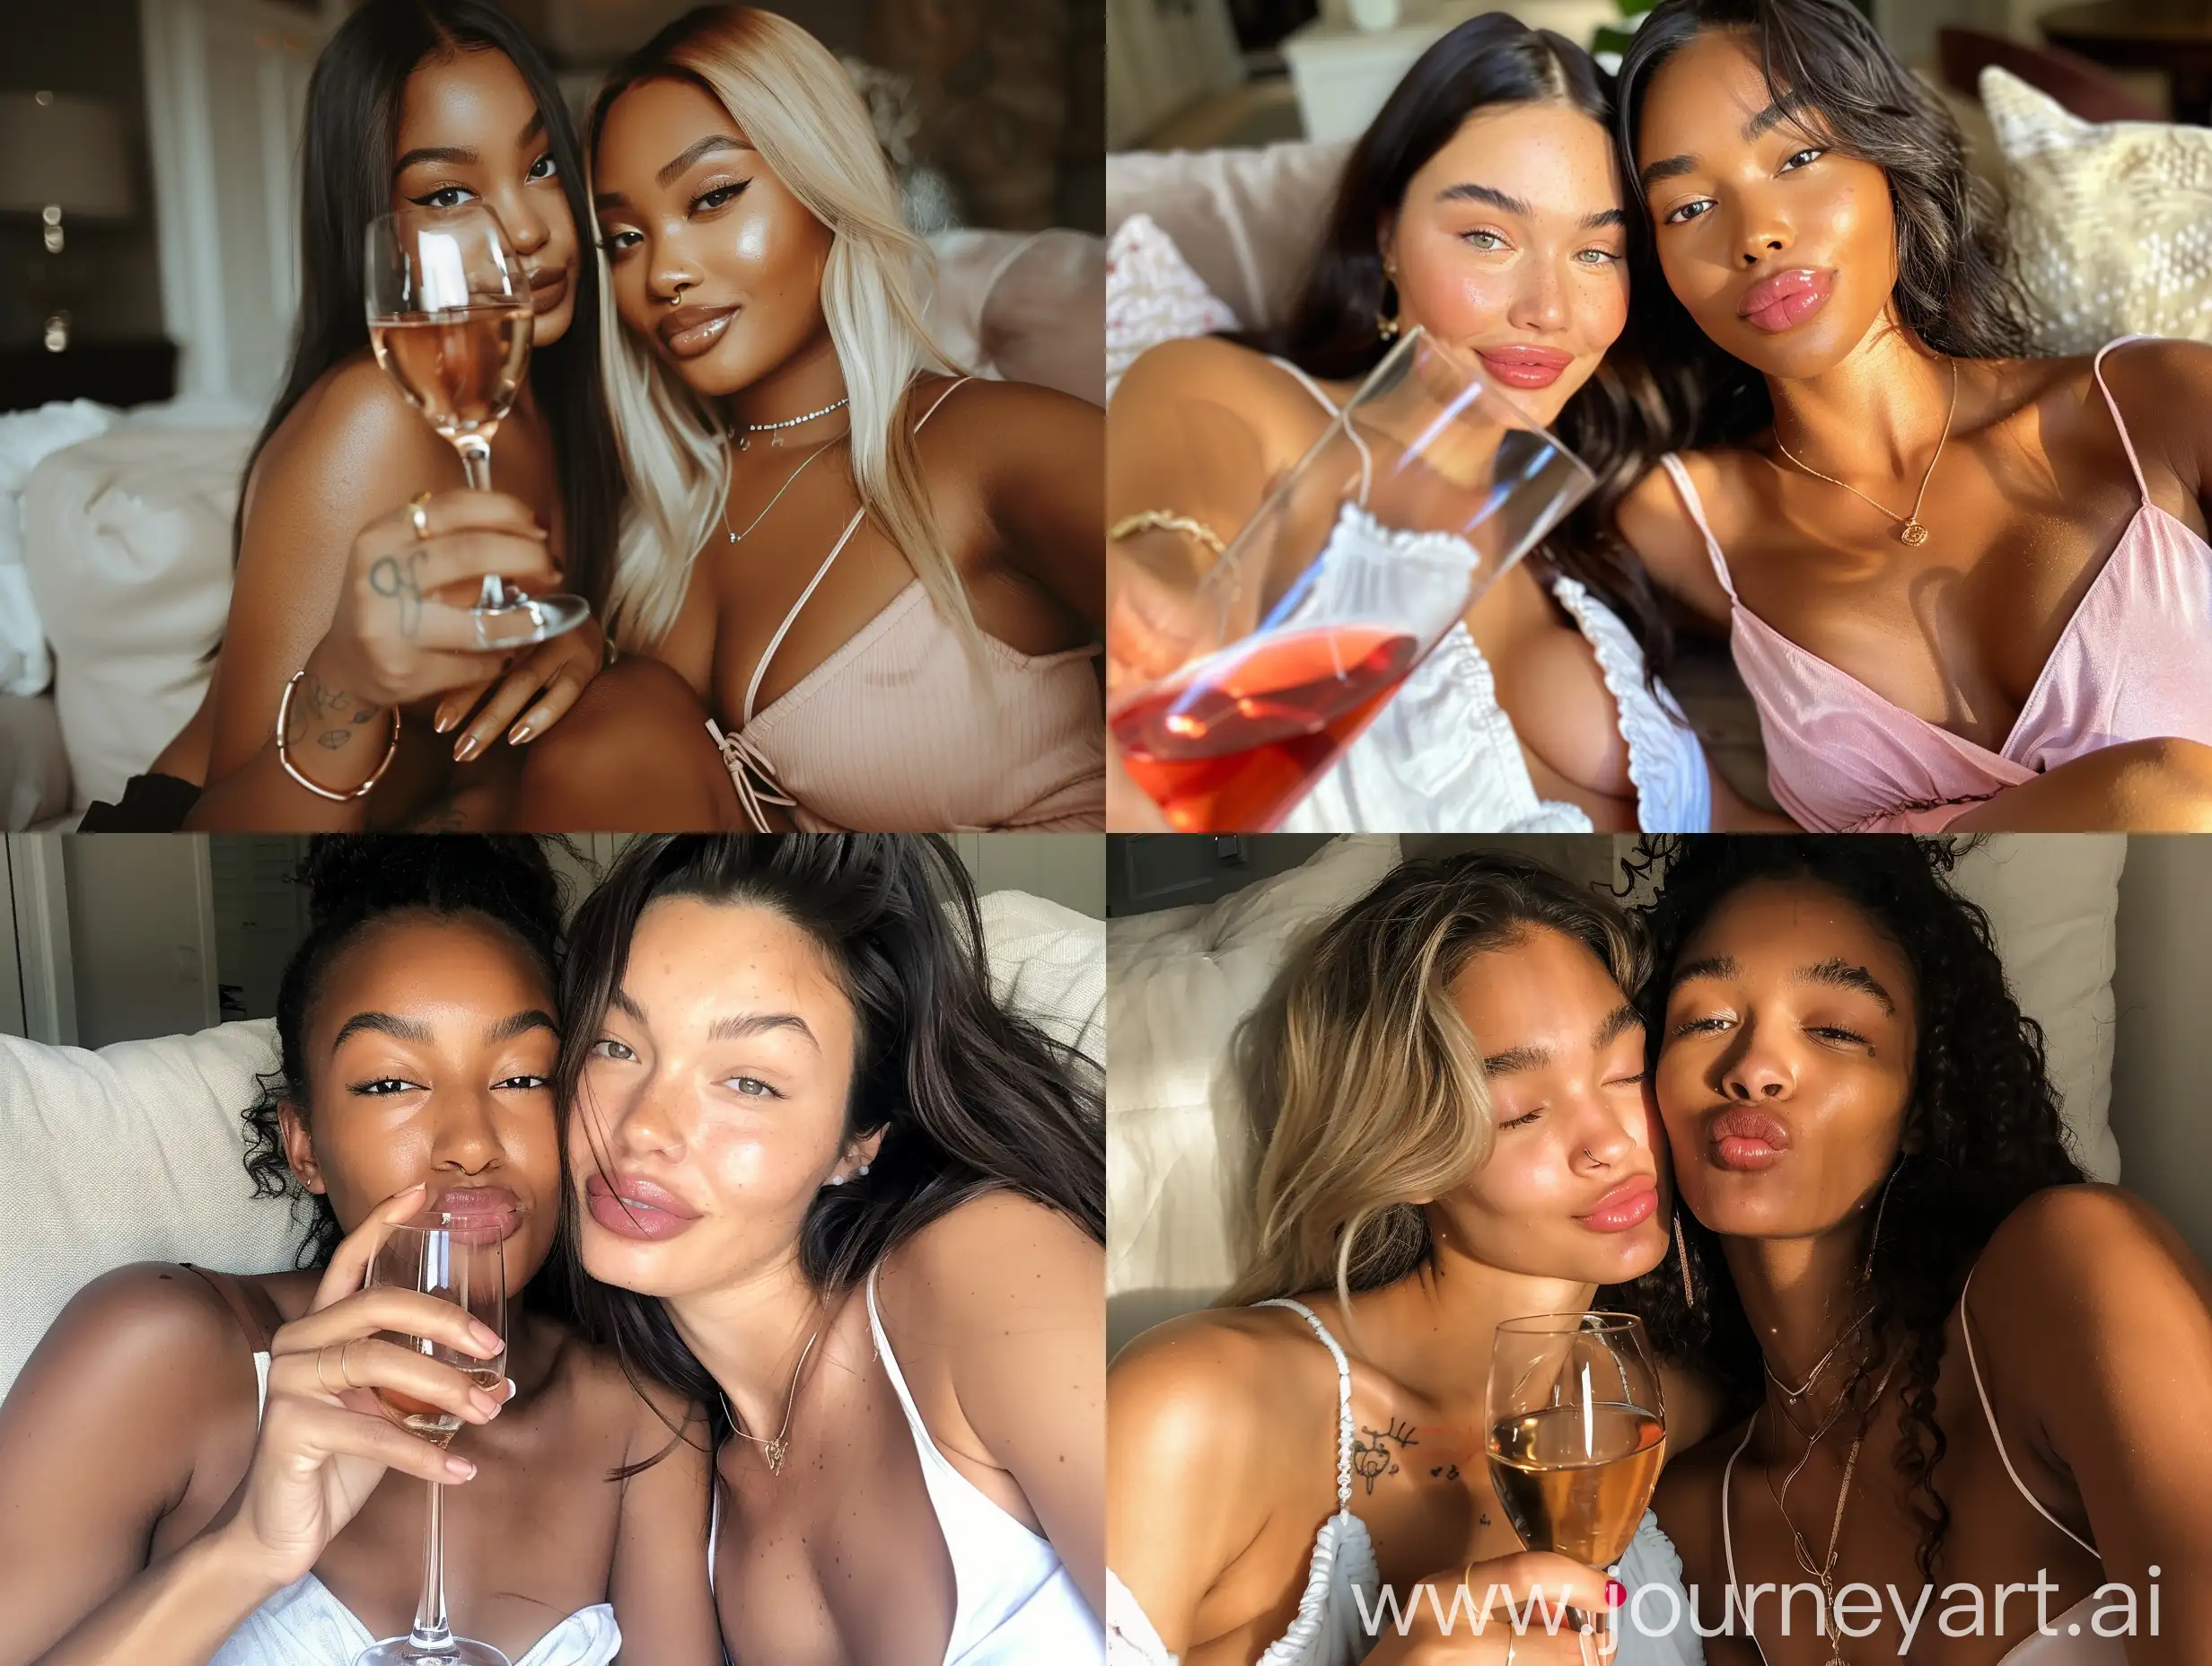 Aesthetic Instagram selfie of two girl best friends, at home, sitting on couch, drinking wine, mother's, flirty, drunk, super models, 1 black girl, 1 white girl, close up selfie